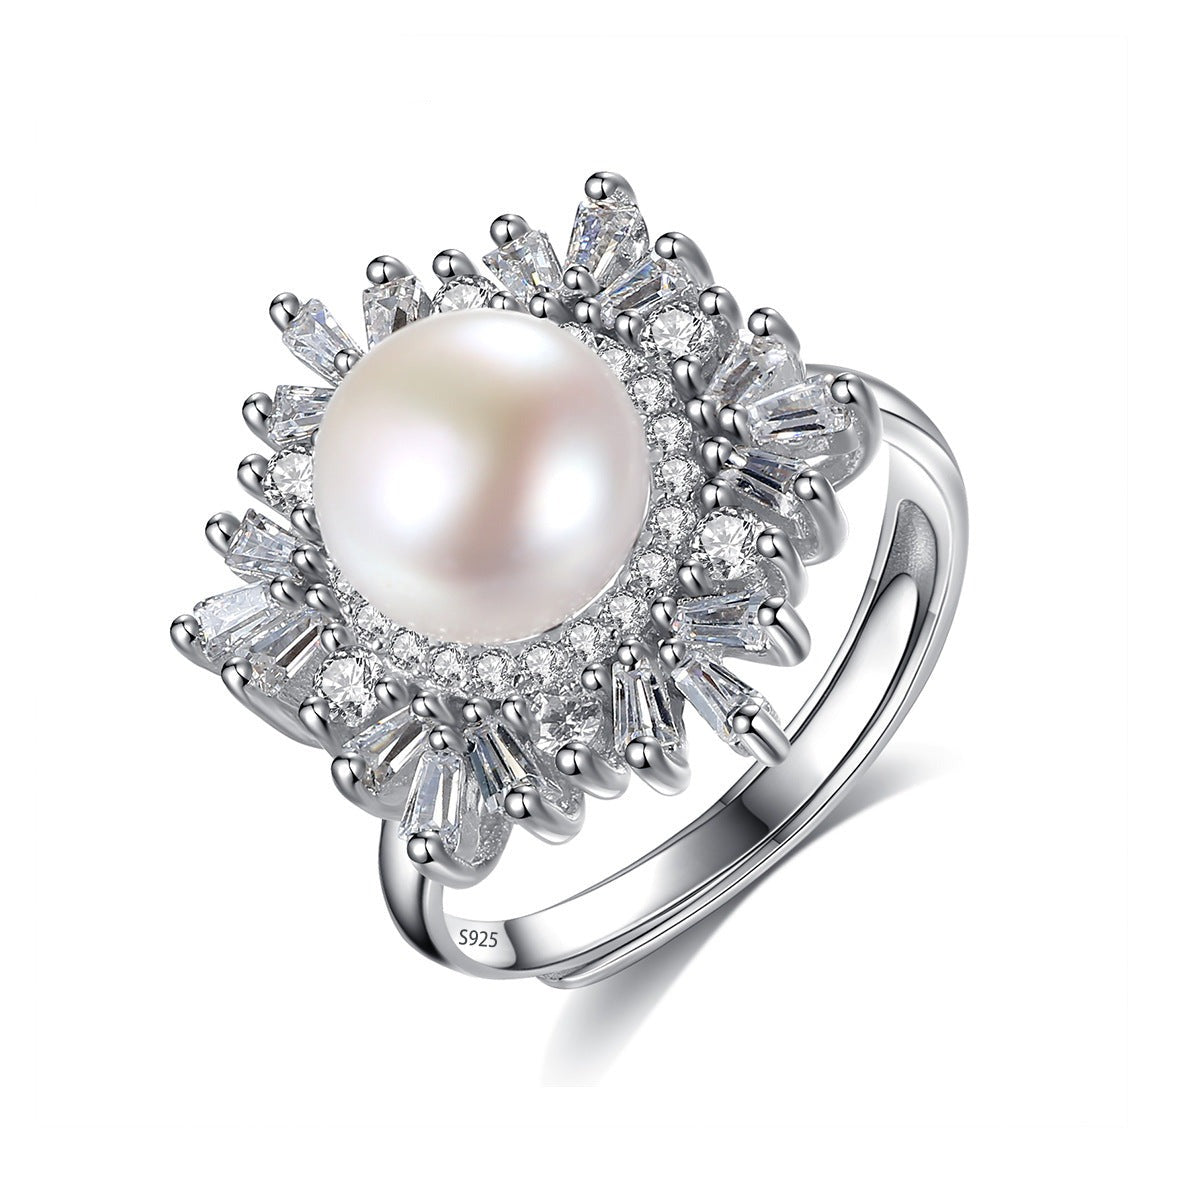 Pearl Cluster Ring - HERS